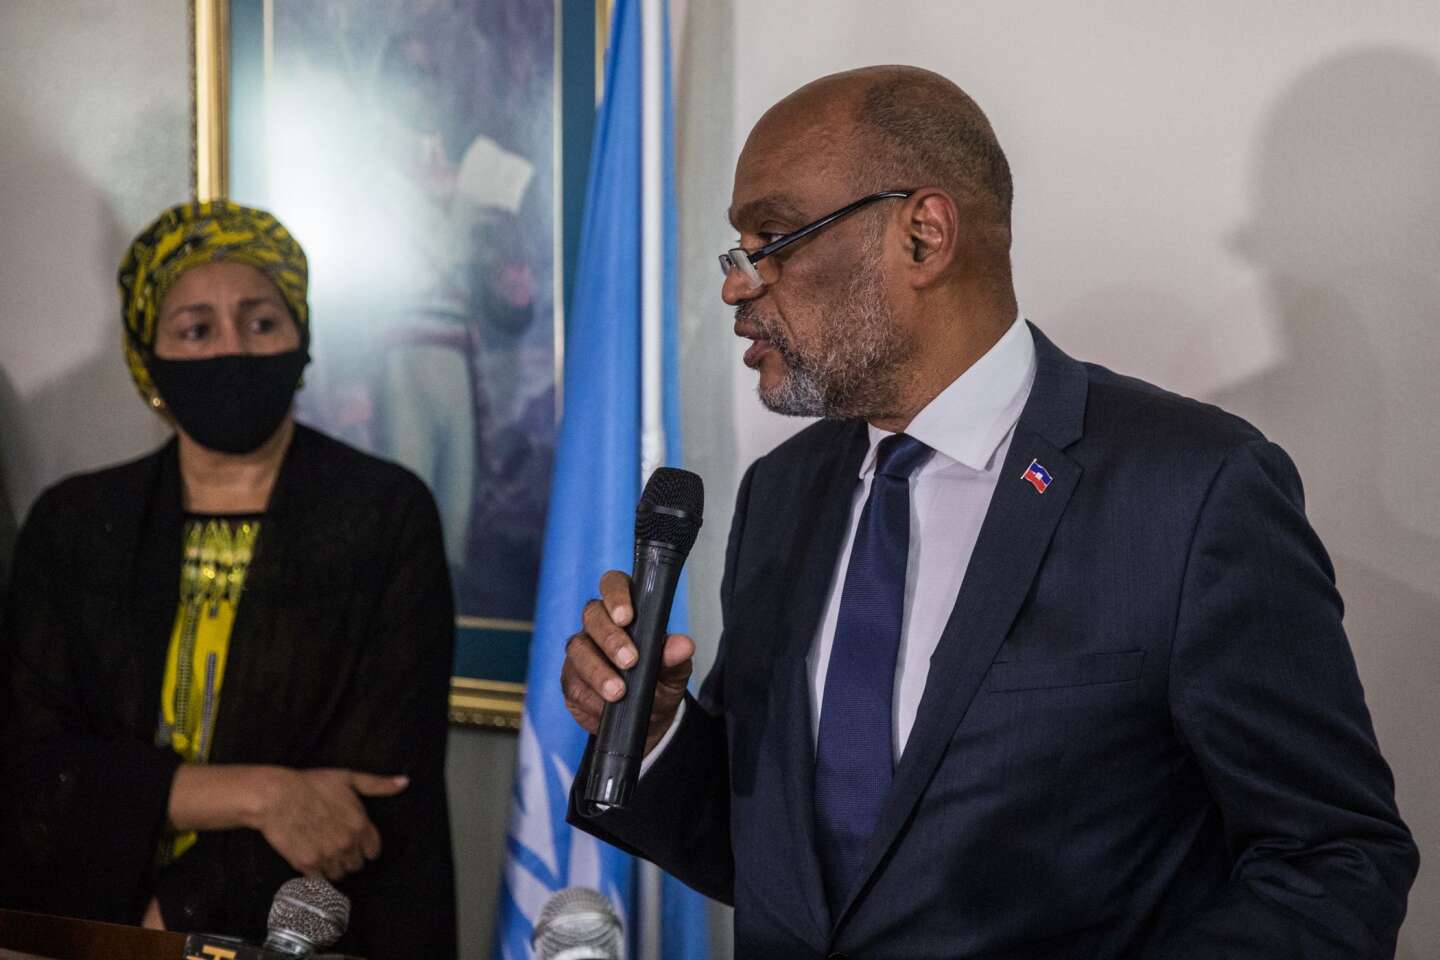 Illustrative photo The Deputy Secretary-General of the UN, Amina J. Mohammed, follows the speech of the Haitian Prime Minister, Ariel Henry, in Port-au-Prince, Friday August 20, 2021. VALERIE BAERISWYL / AFP